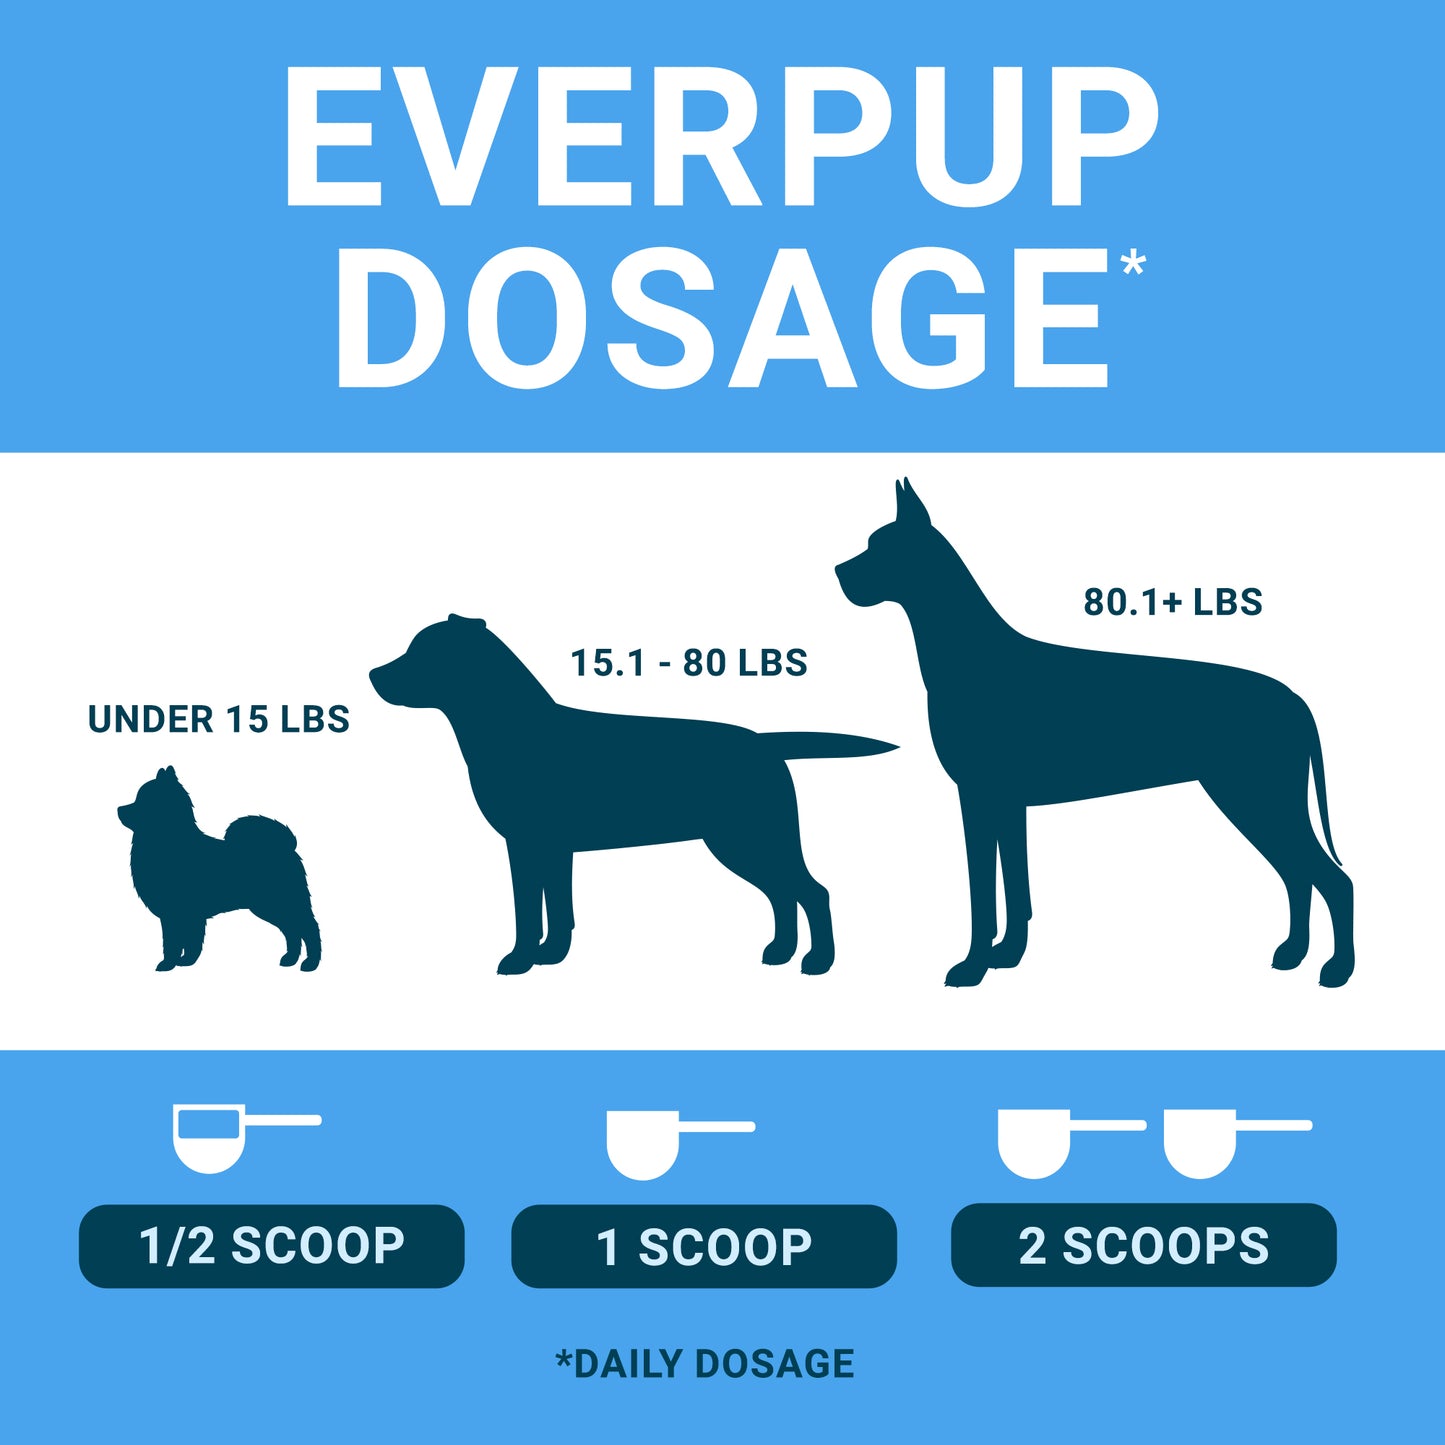 EverPup Ultimate Daily Dog Supplement (180 grams)